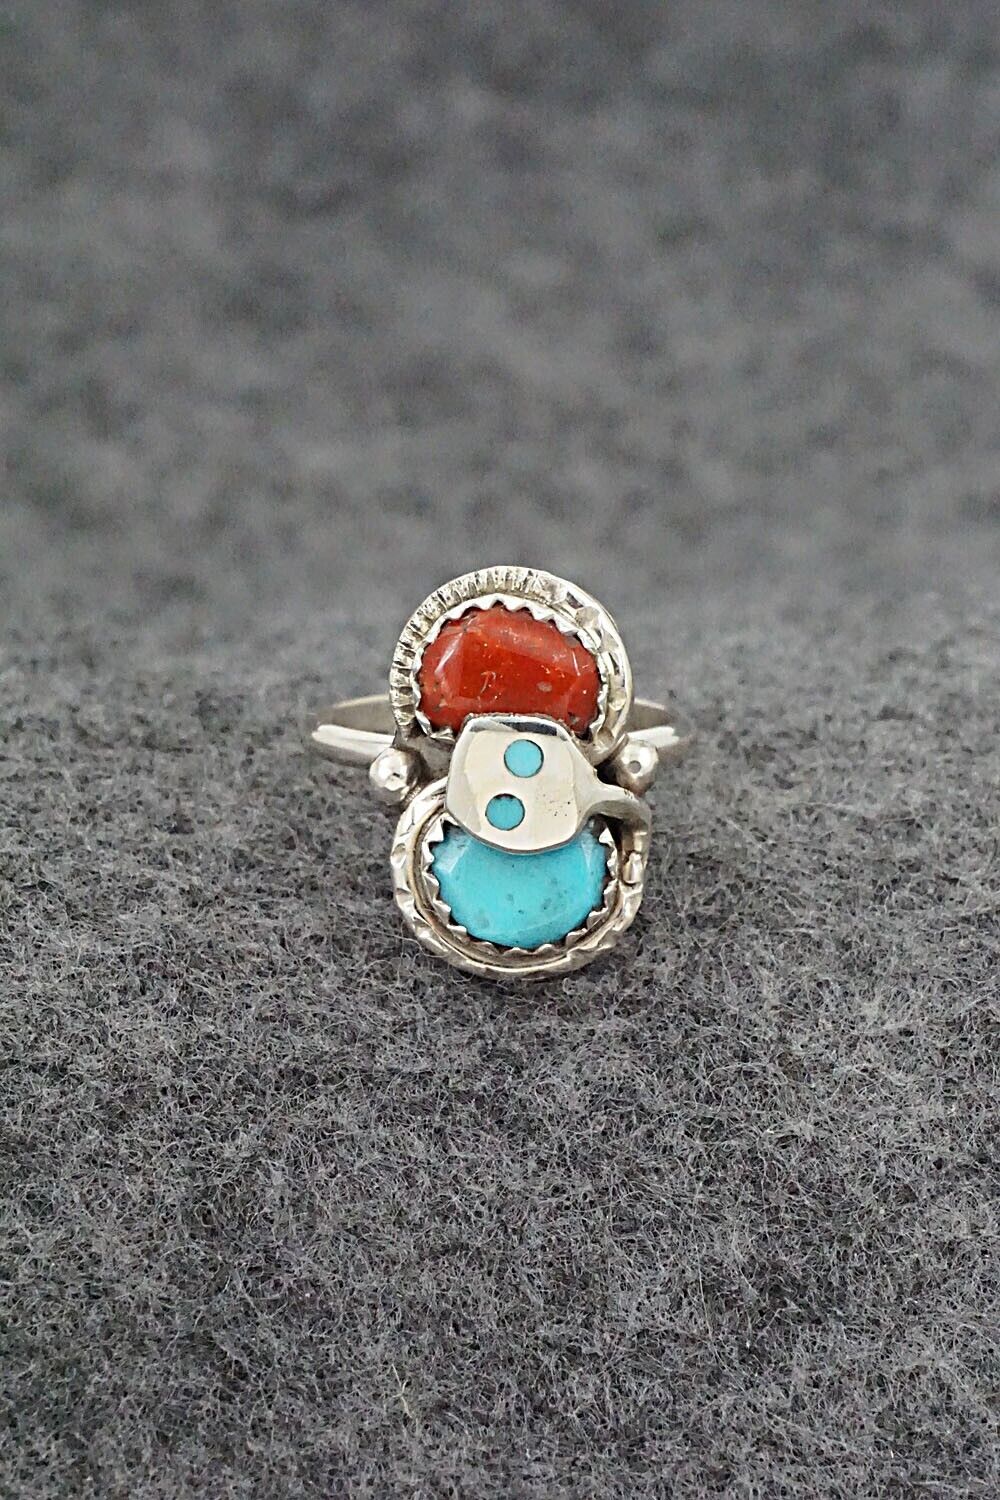 Turquoise, Coral & Sterling Silver Ring - Joy Calavaza - Size 5.75